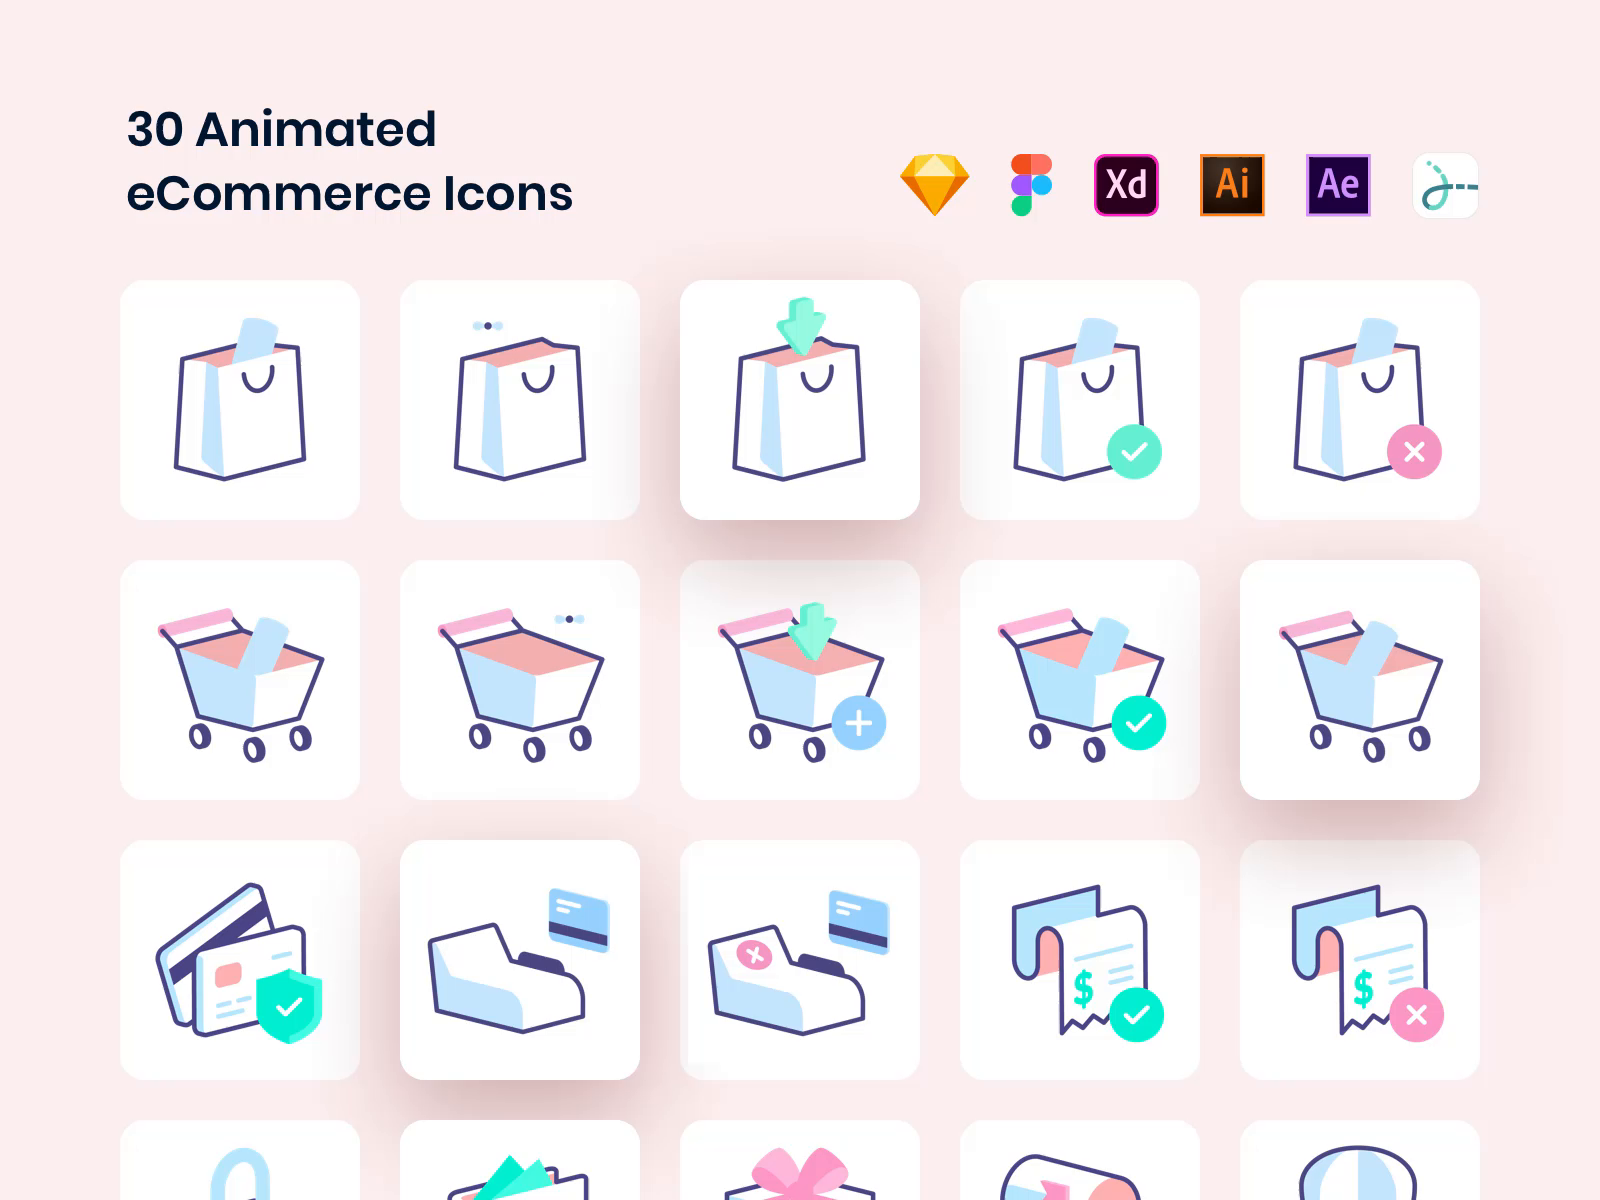 Essential eCommerce Icons by Filip Greš for Drawer on Dribbble